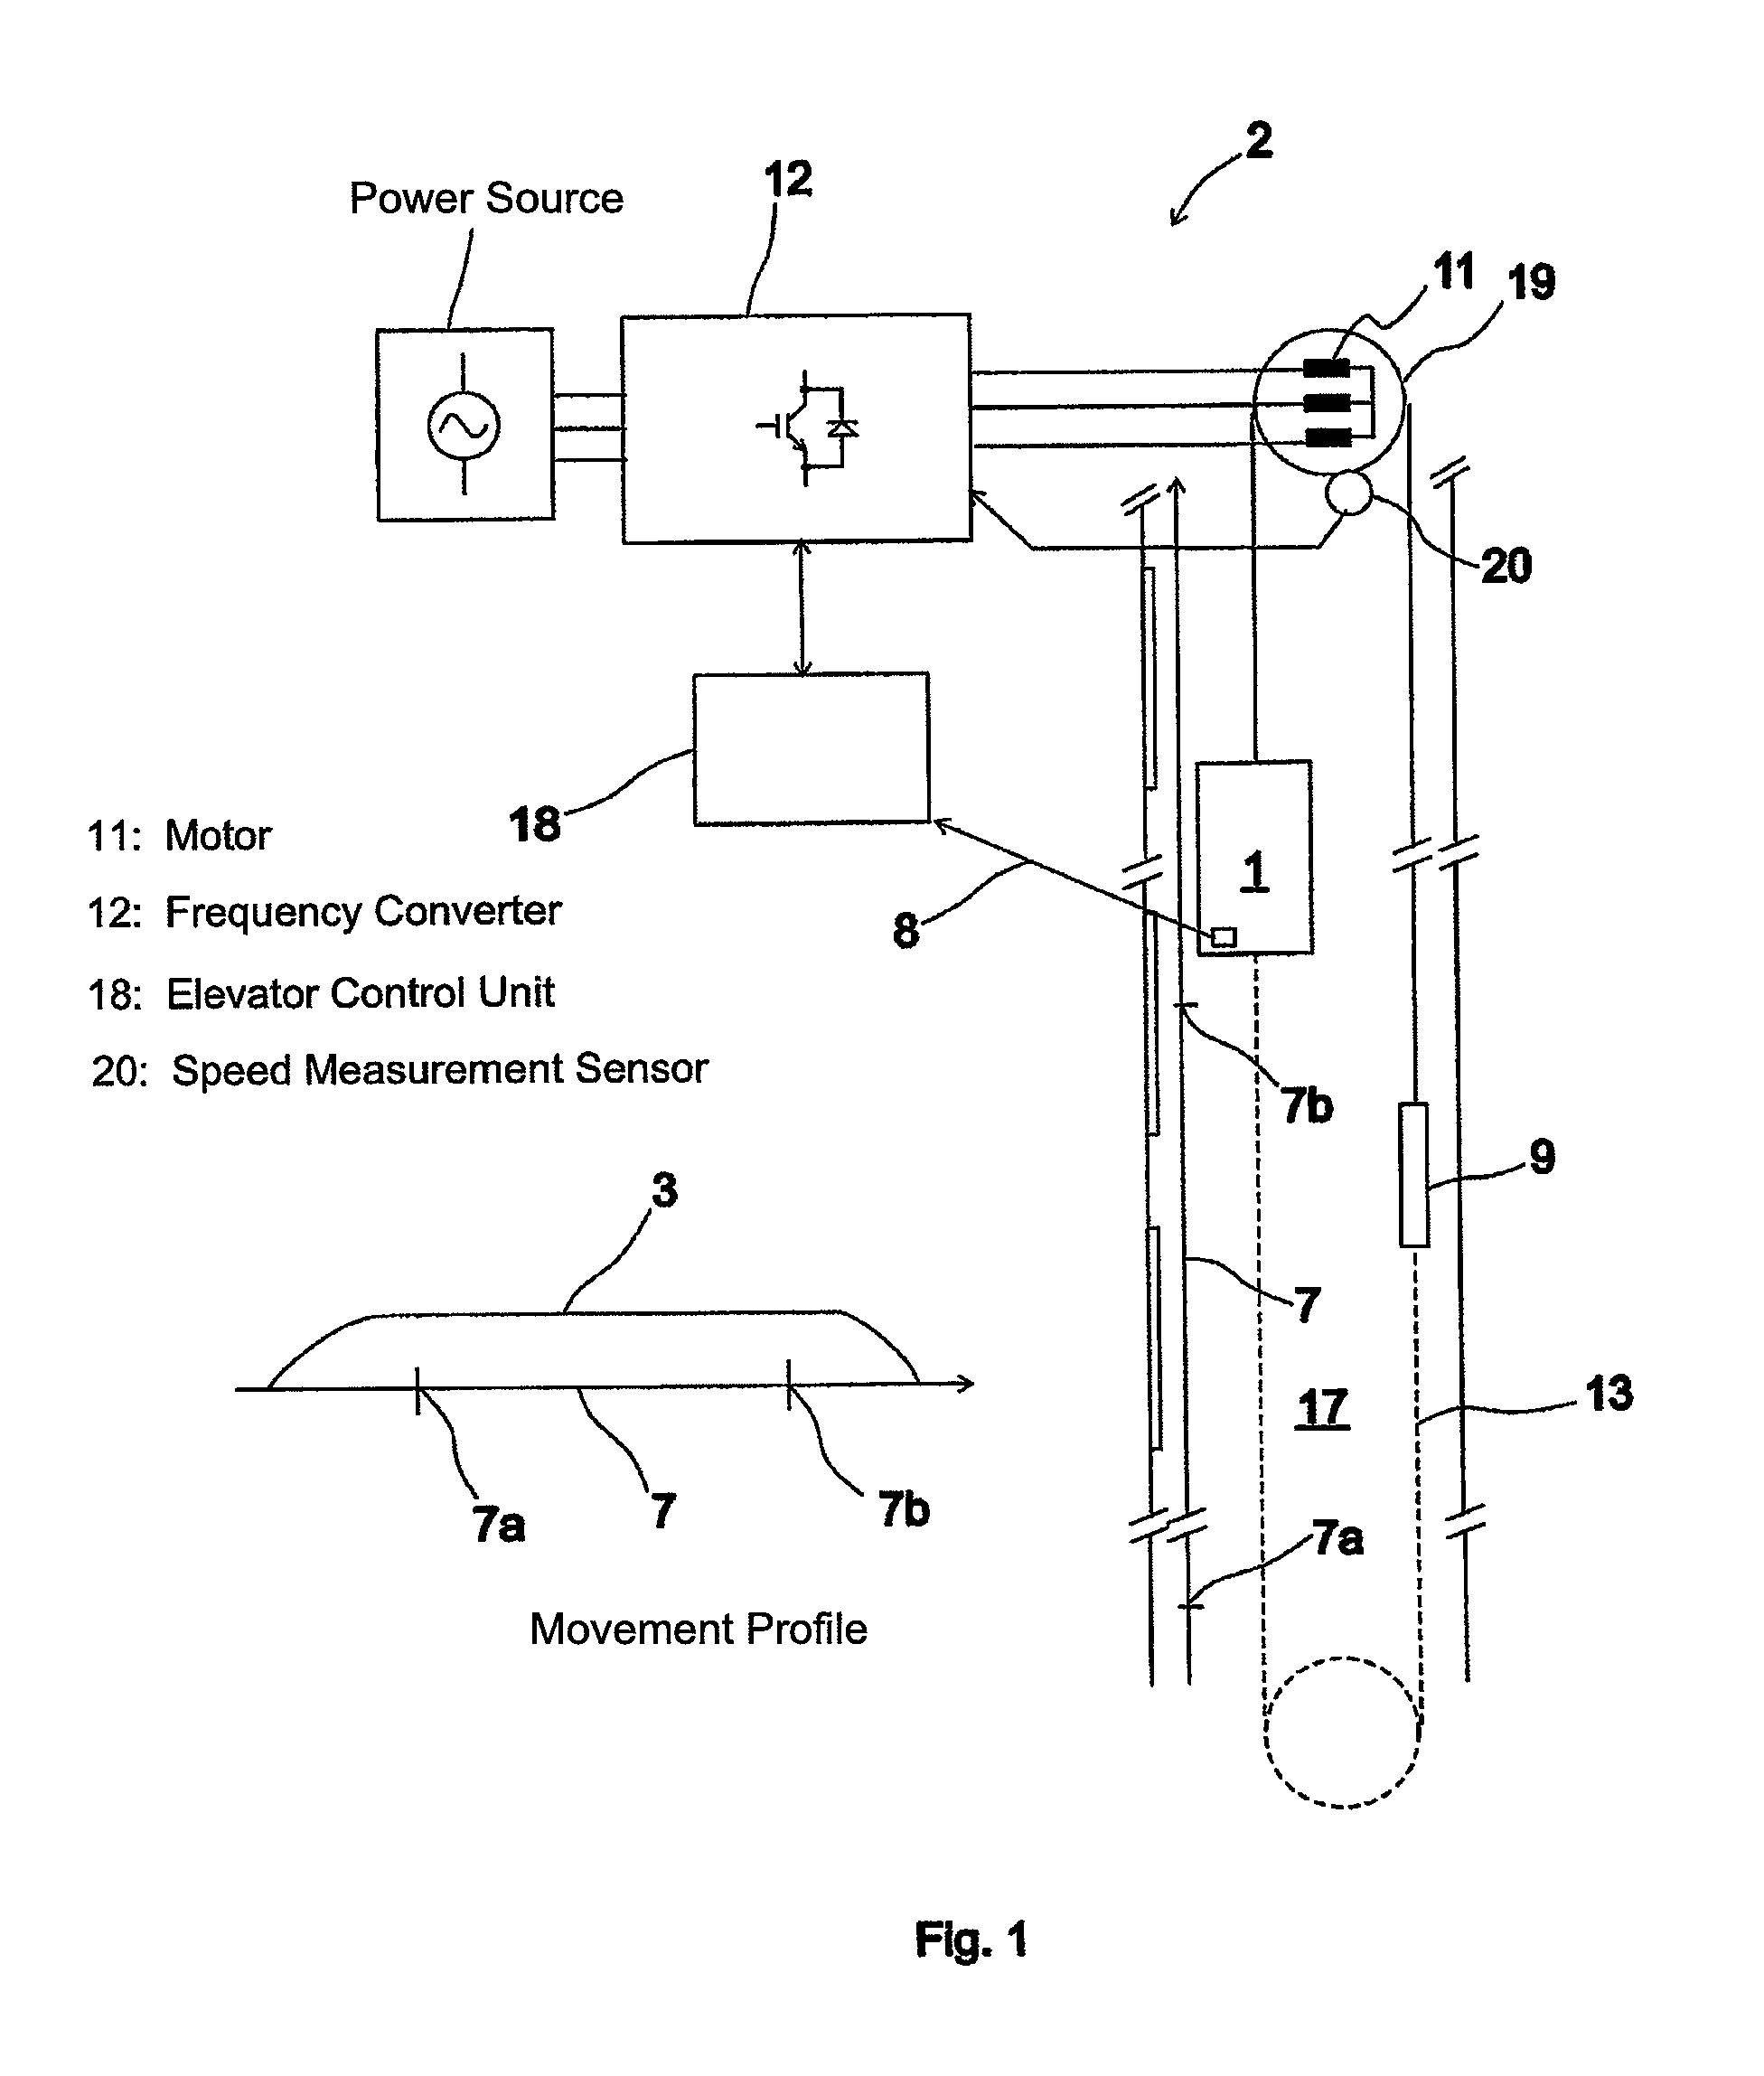 Elevator system using a movement profile